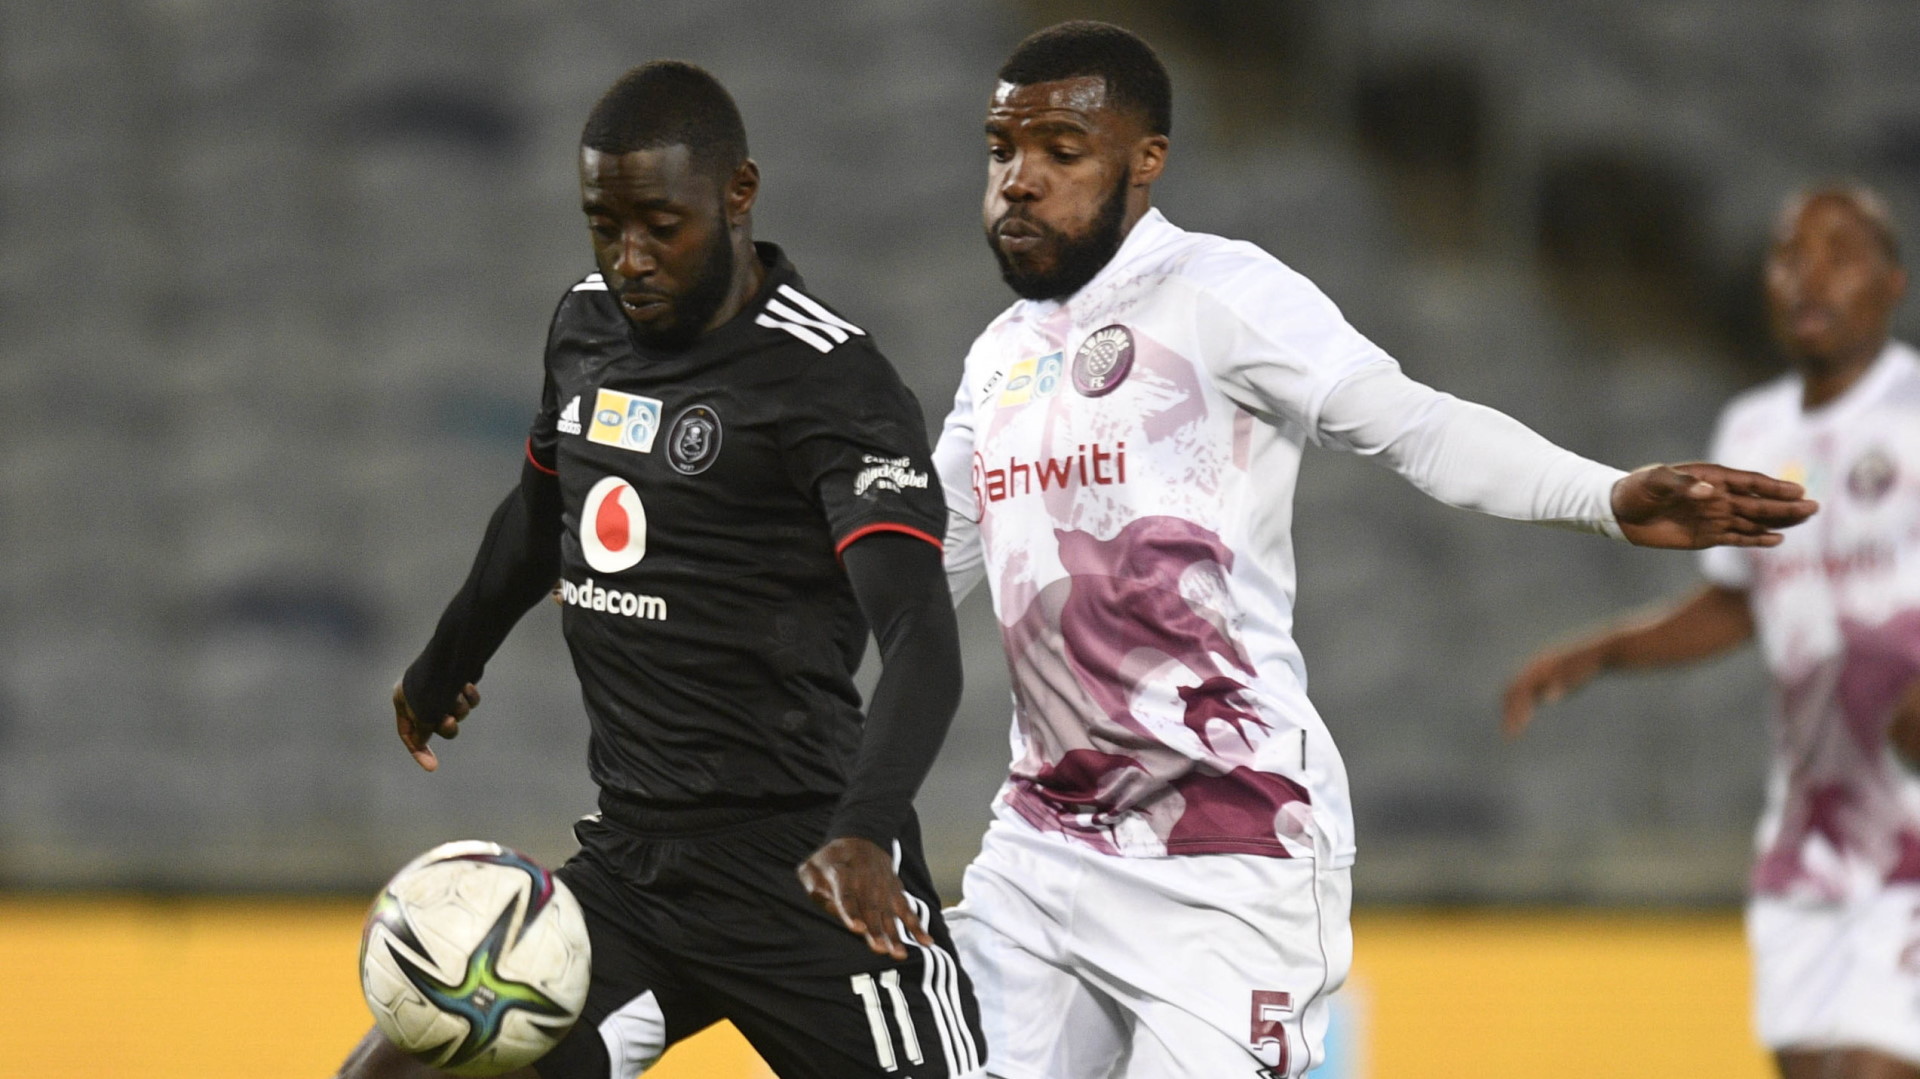 Orlando Pirates legend Modise believes ‘there is an identity crisis’ at Bucs after MTN8 exit